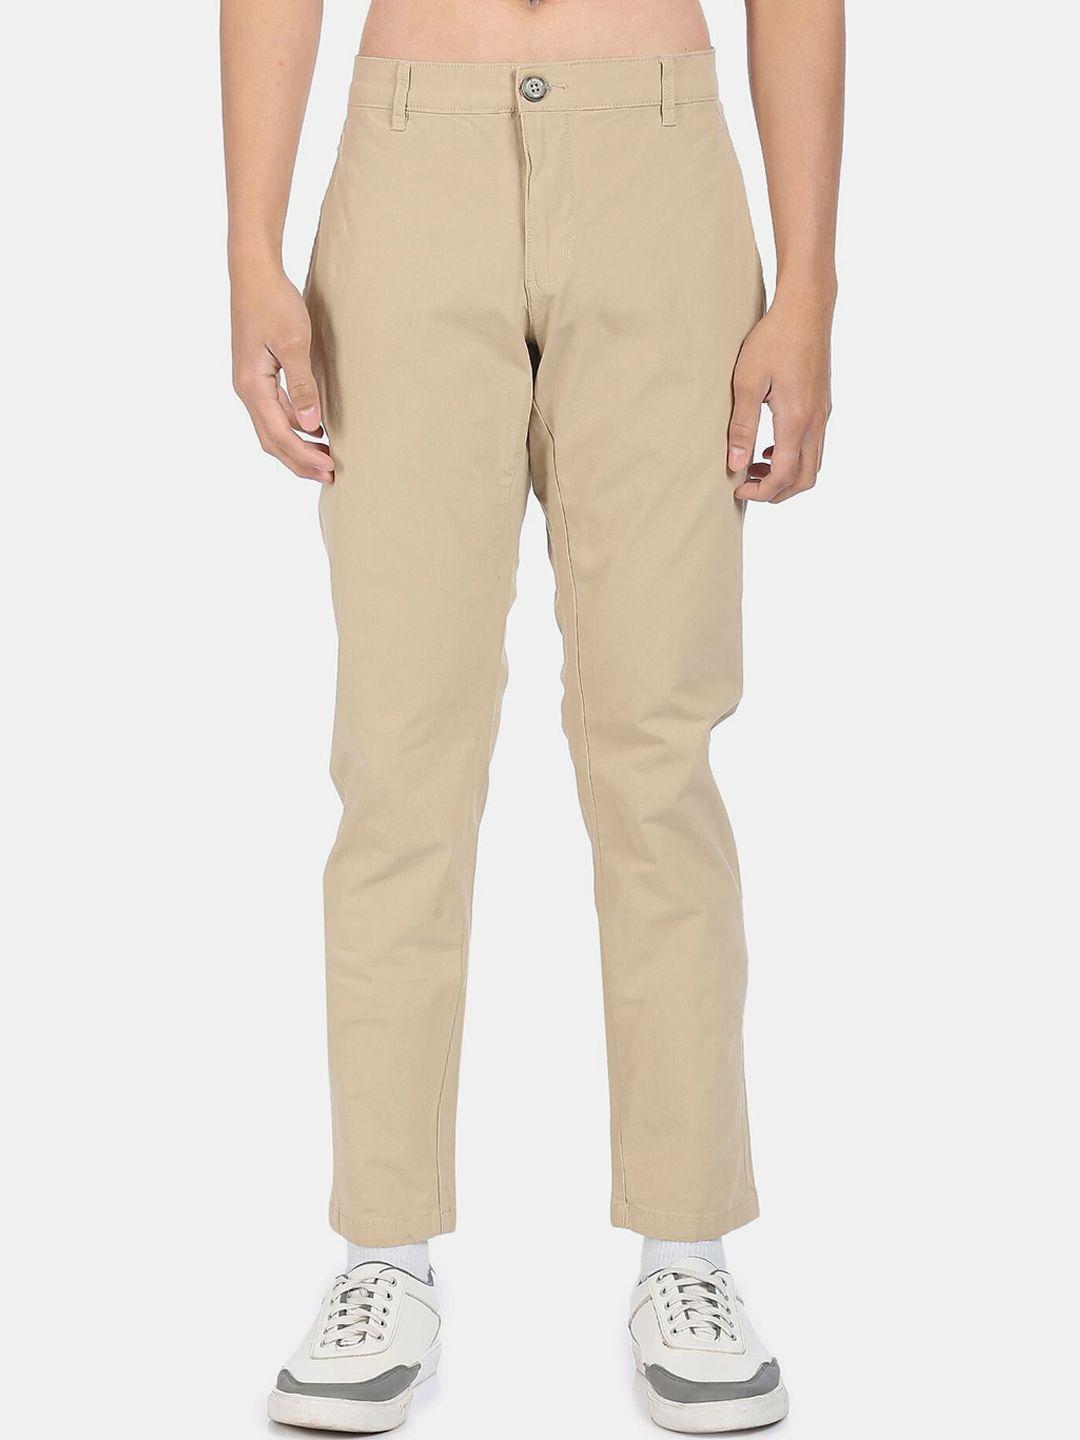 flying-machine-men-beige-solid-mid-rise-casual-cotton-trousers